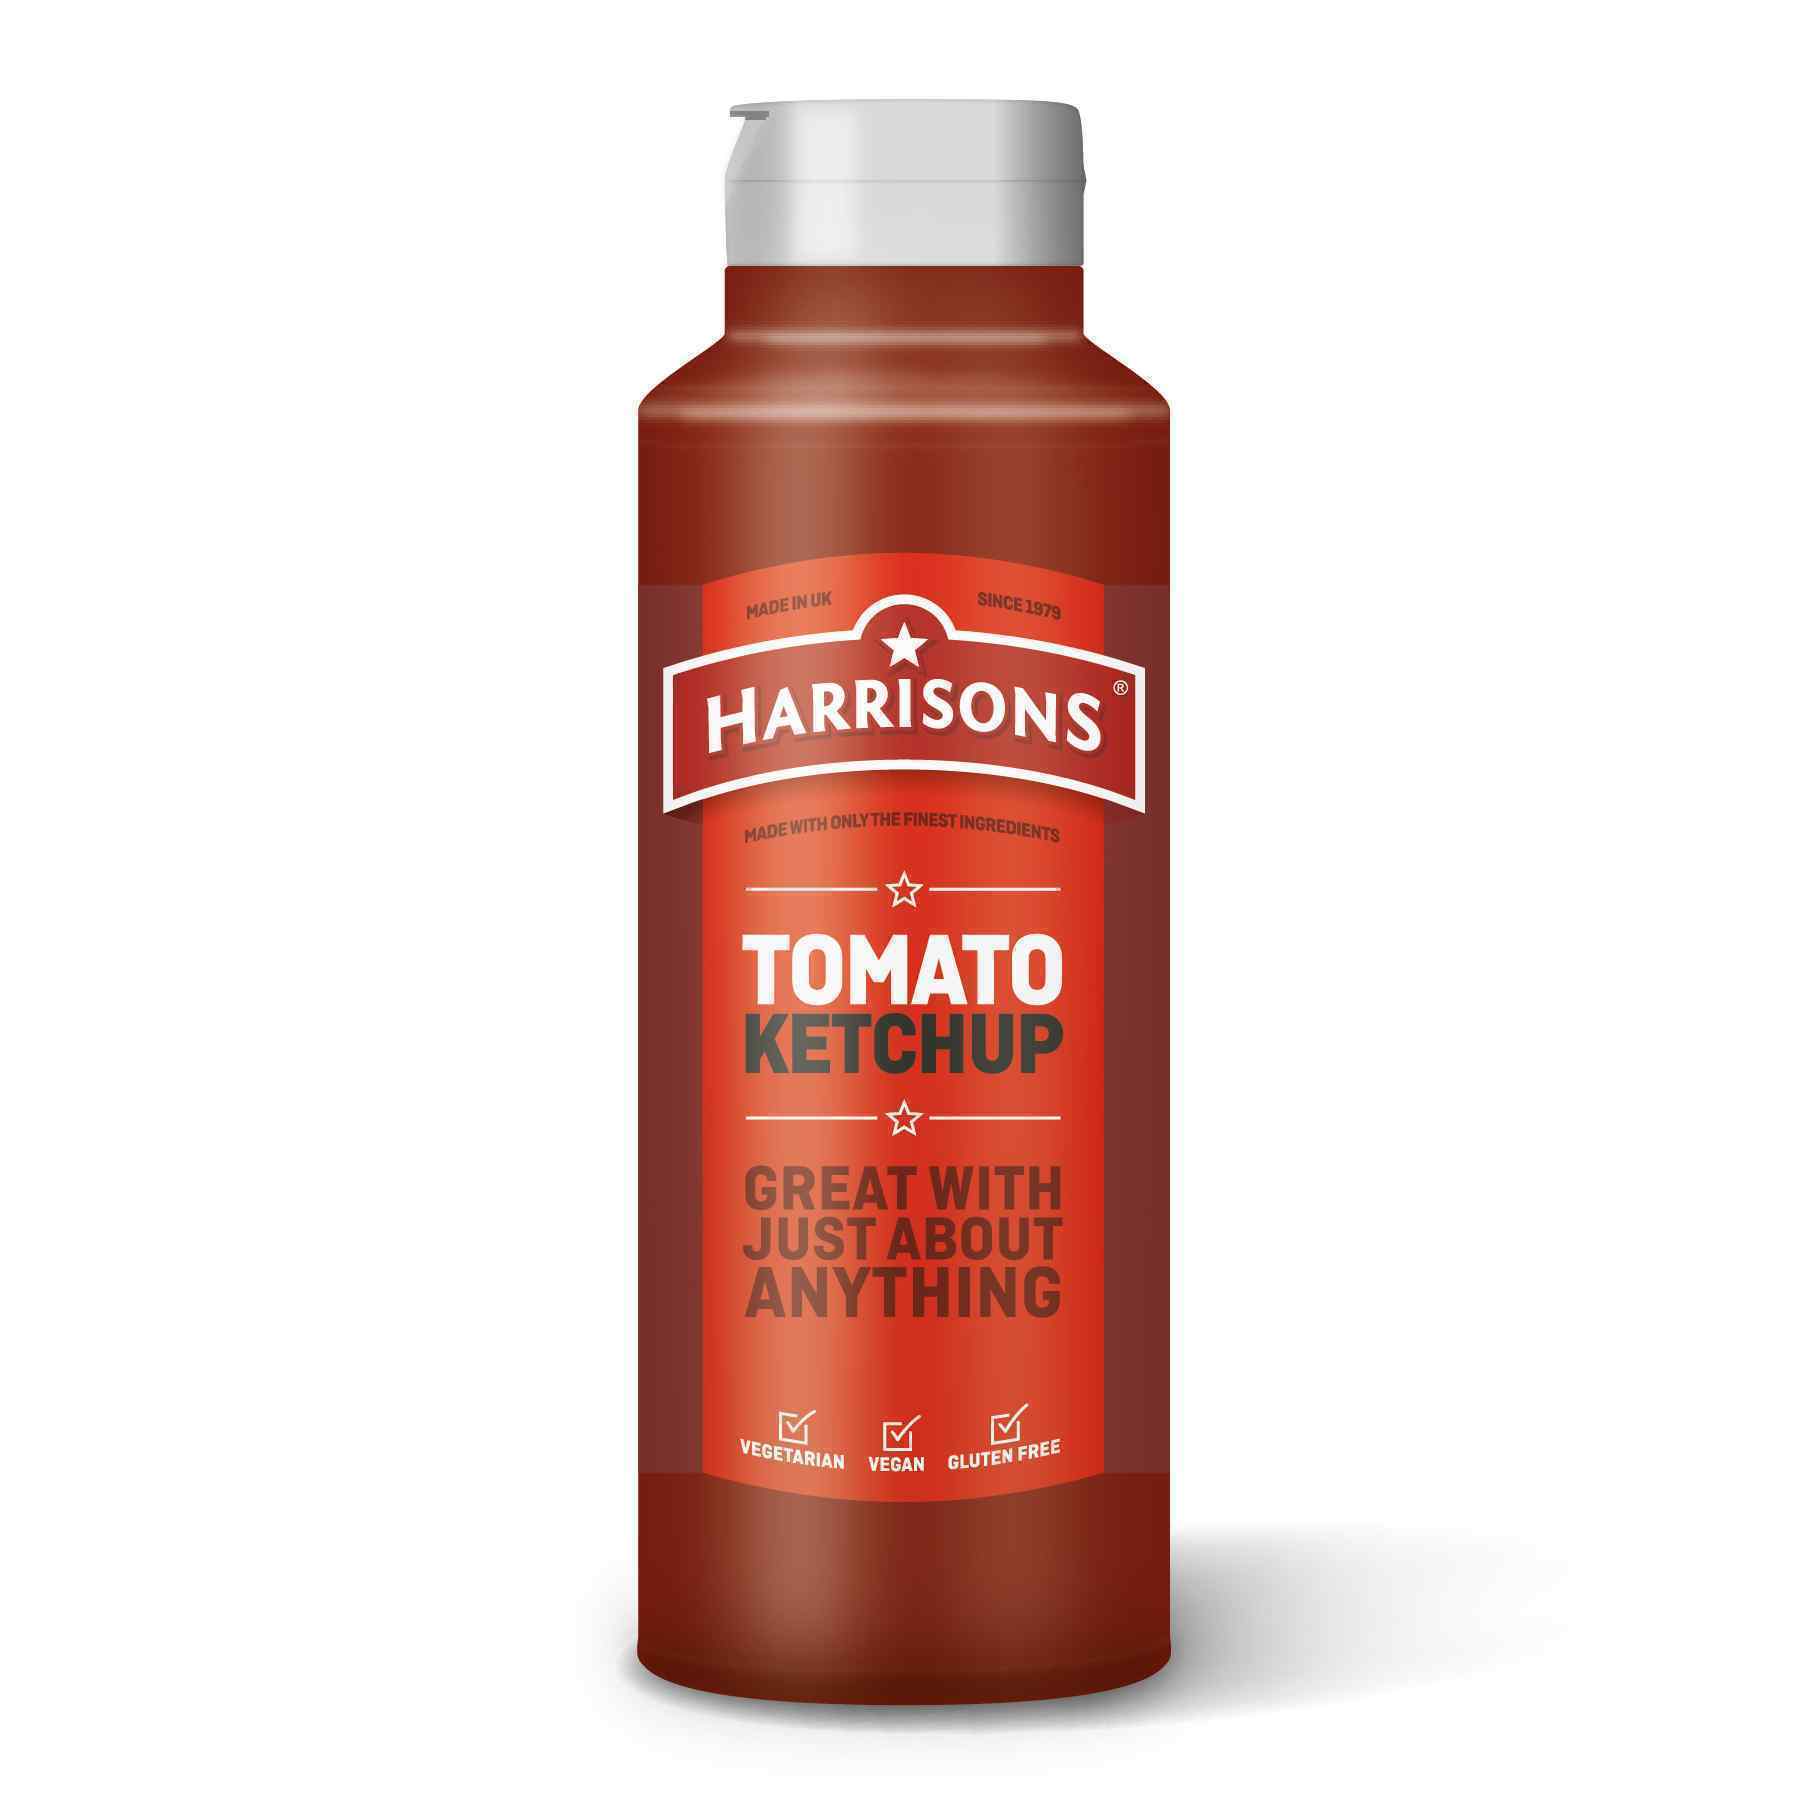 Tomato Ketchup Squeezy Bottles (6x1ltr)